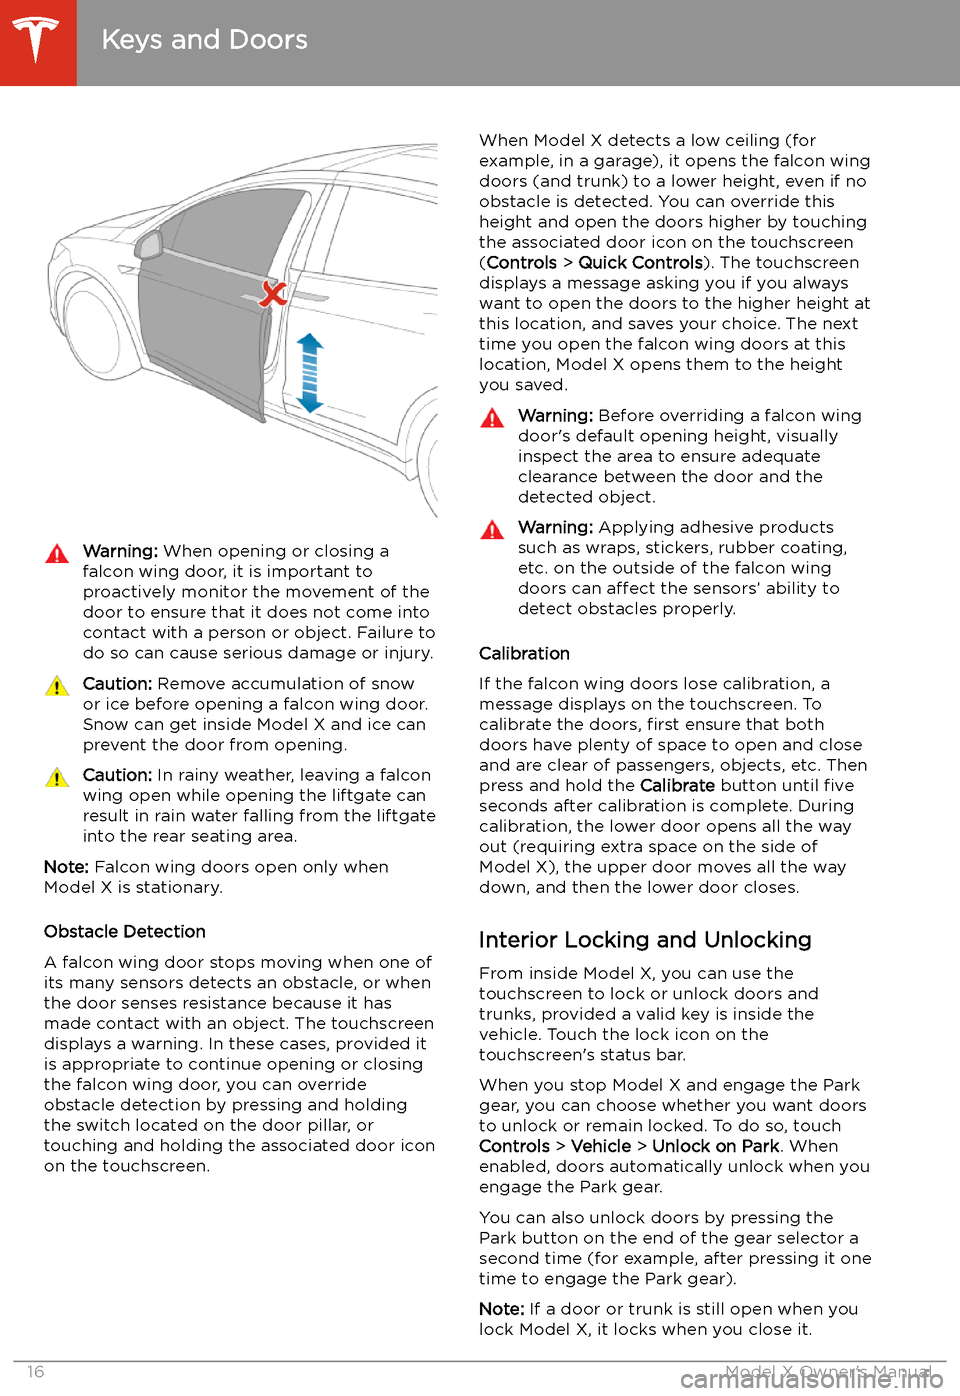 TESLA MODEL X 2020  Owners Manual Warning: When opening or closing a
falcon wing door, it is important to
proactively monitor the movement of the door to ensure that it does not come into
contact with a person or object. Failure to
do